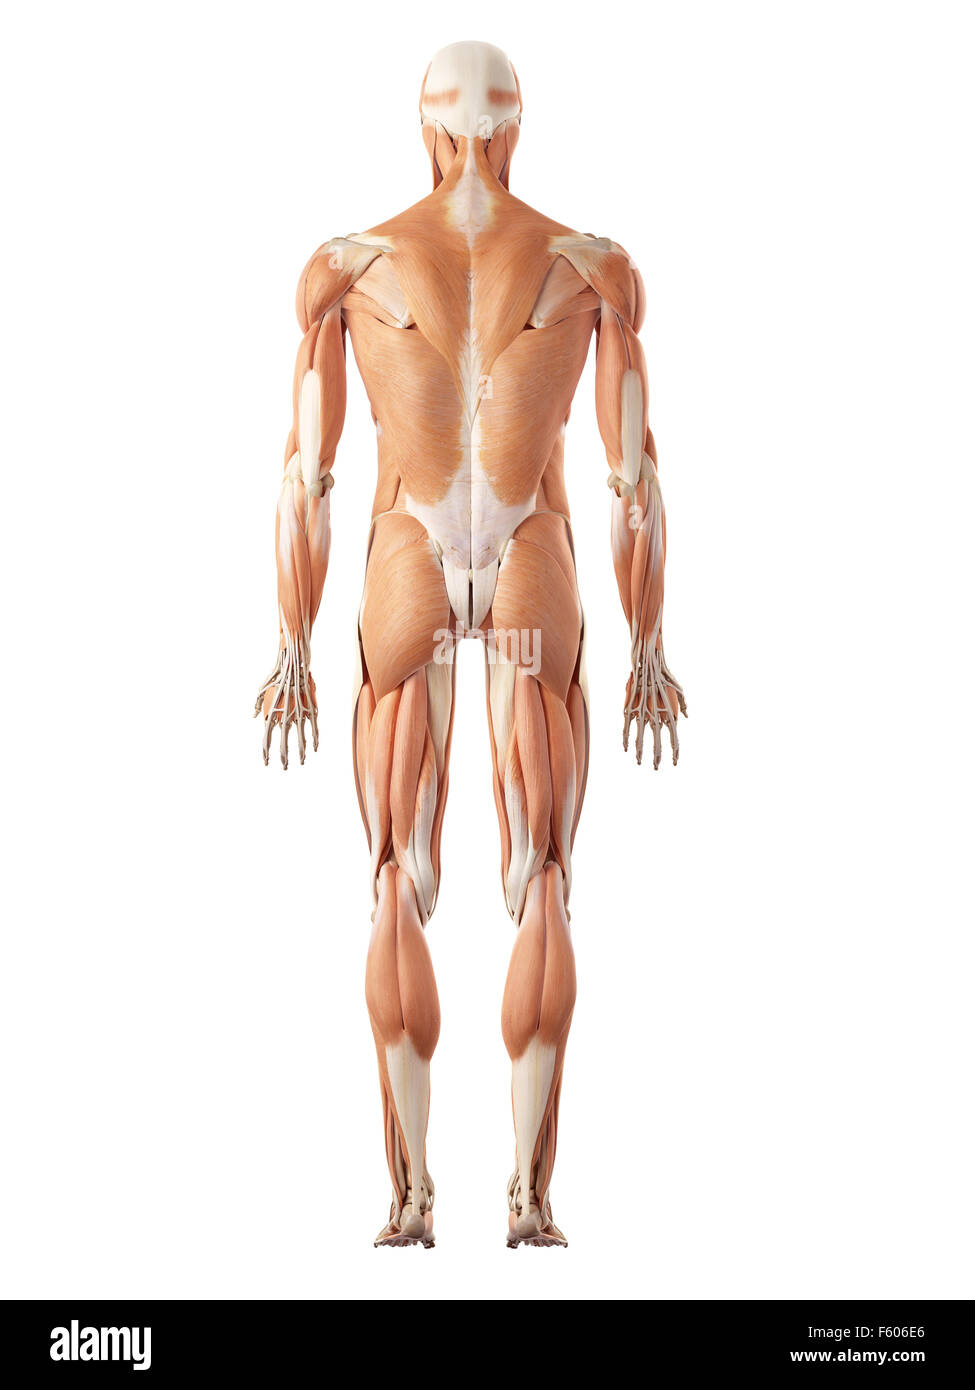 medical accurate illustration of the muscle system Stock Photo